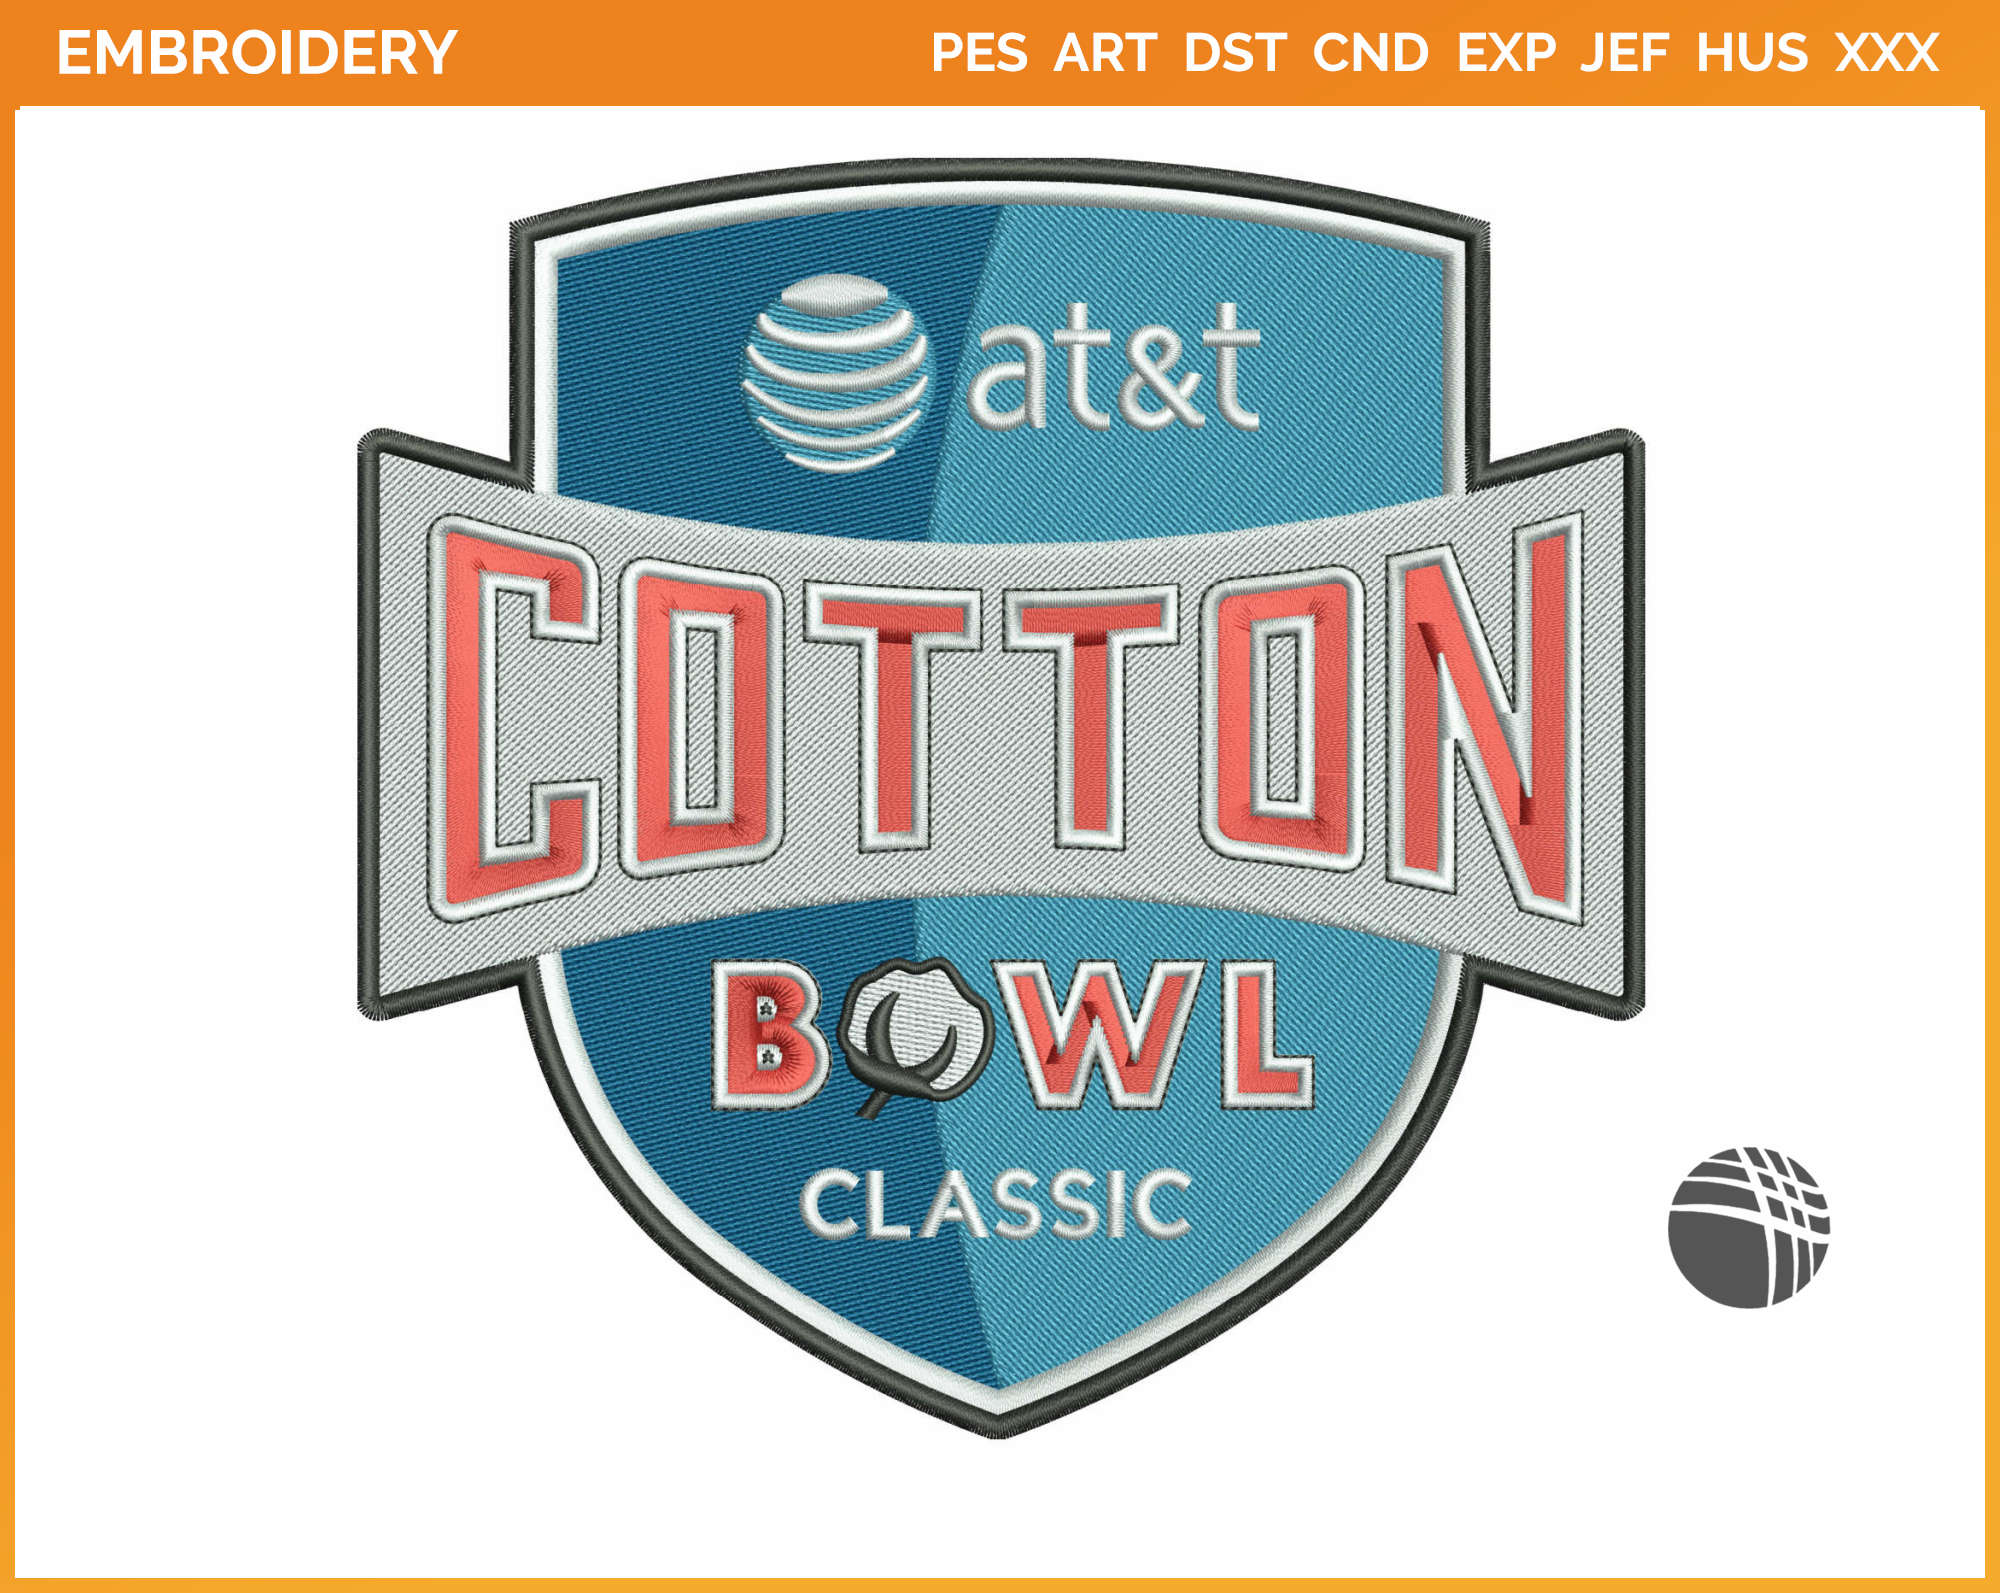 Cotton Bowl Classic 2006, NCAA Bowl Games, College Sports Embroidery